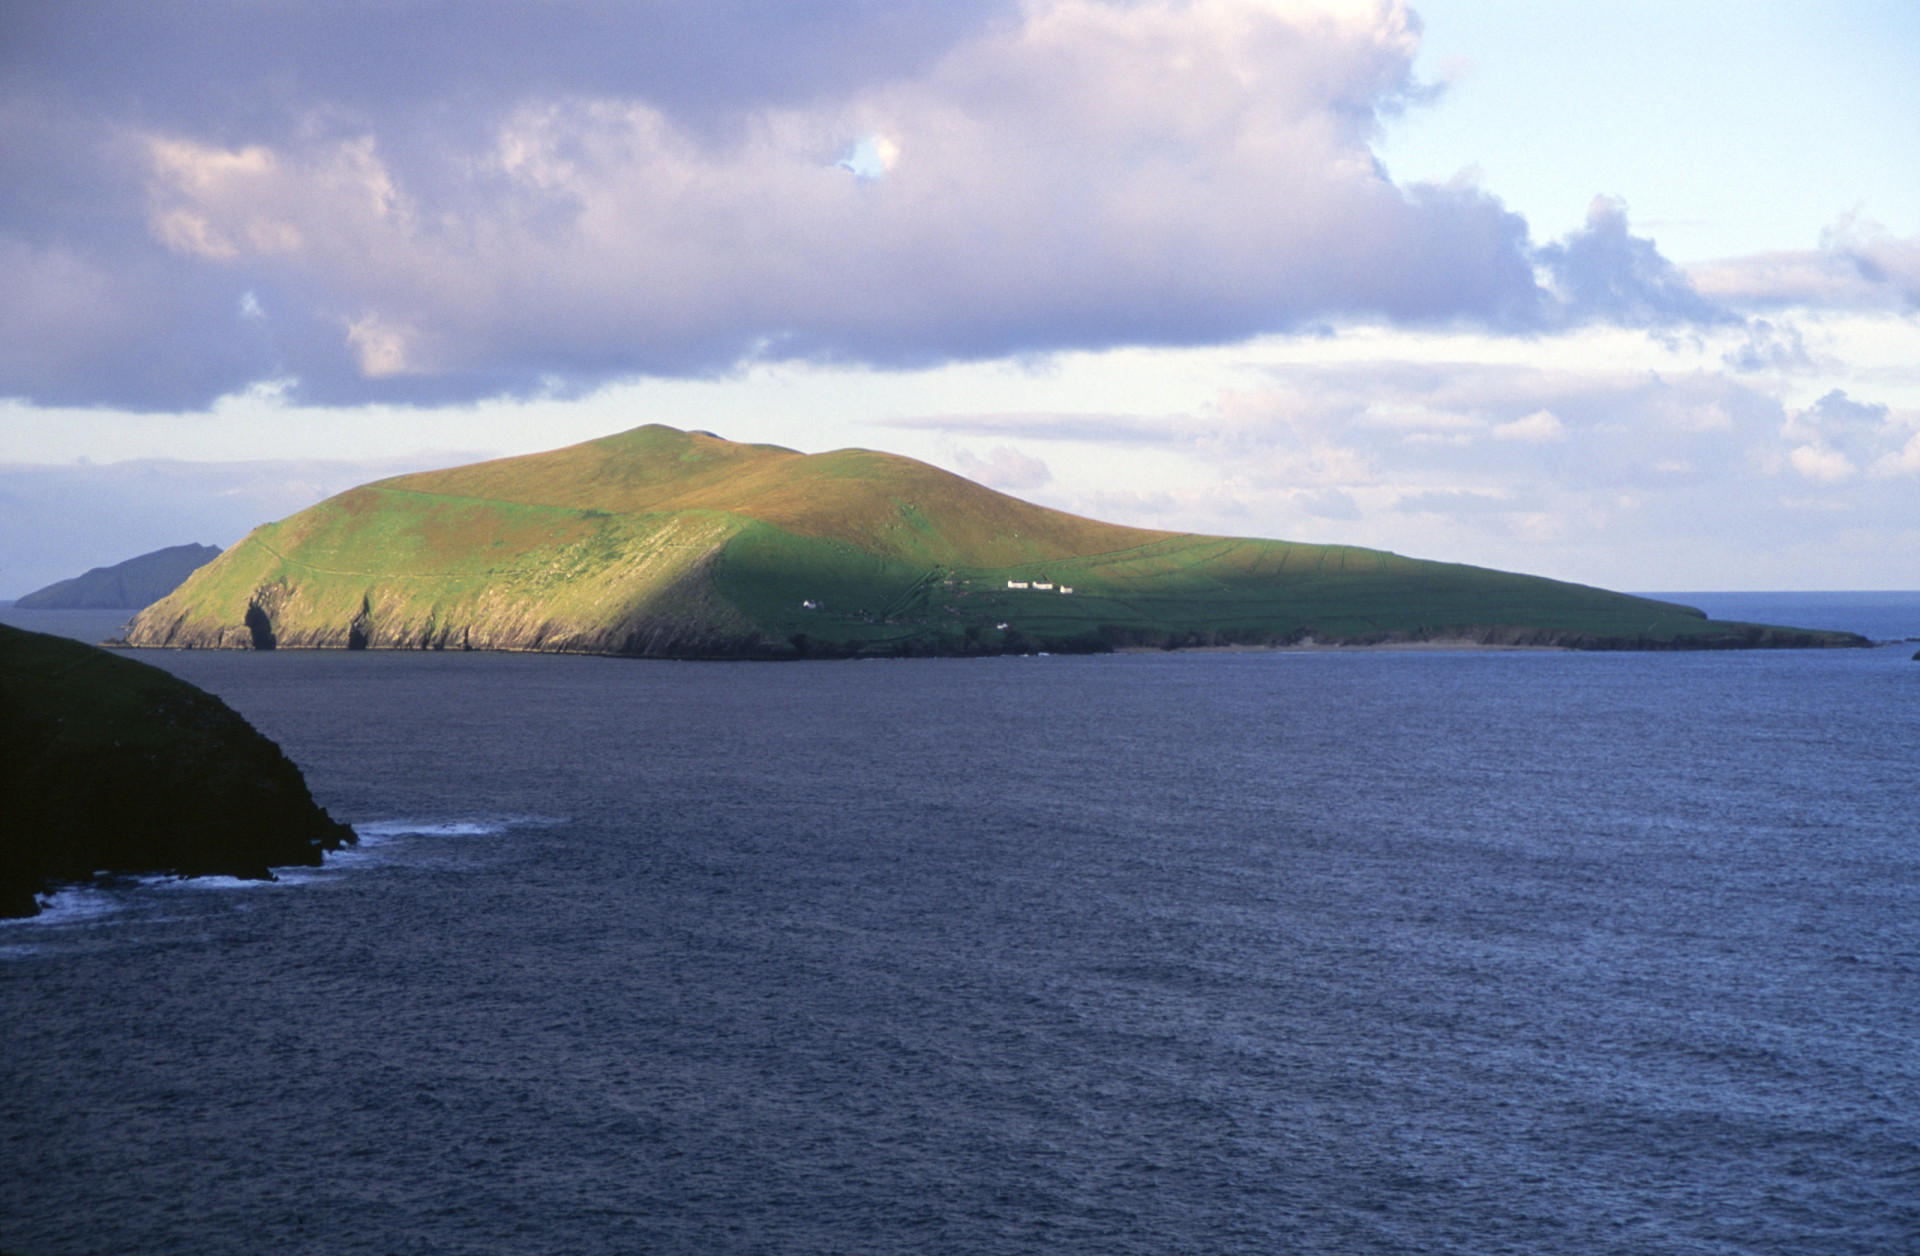 <p>These remote islands off the Dingle Peninsula in Co. Kerry boast 1,100 acres of unspoiled, mountainous terrain.</p>